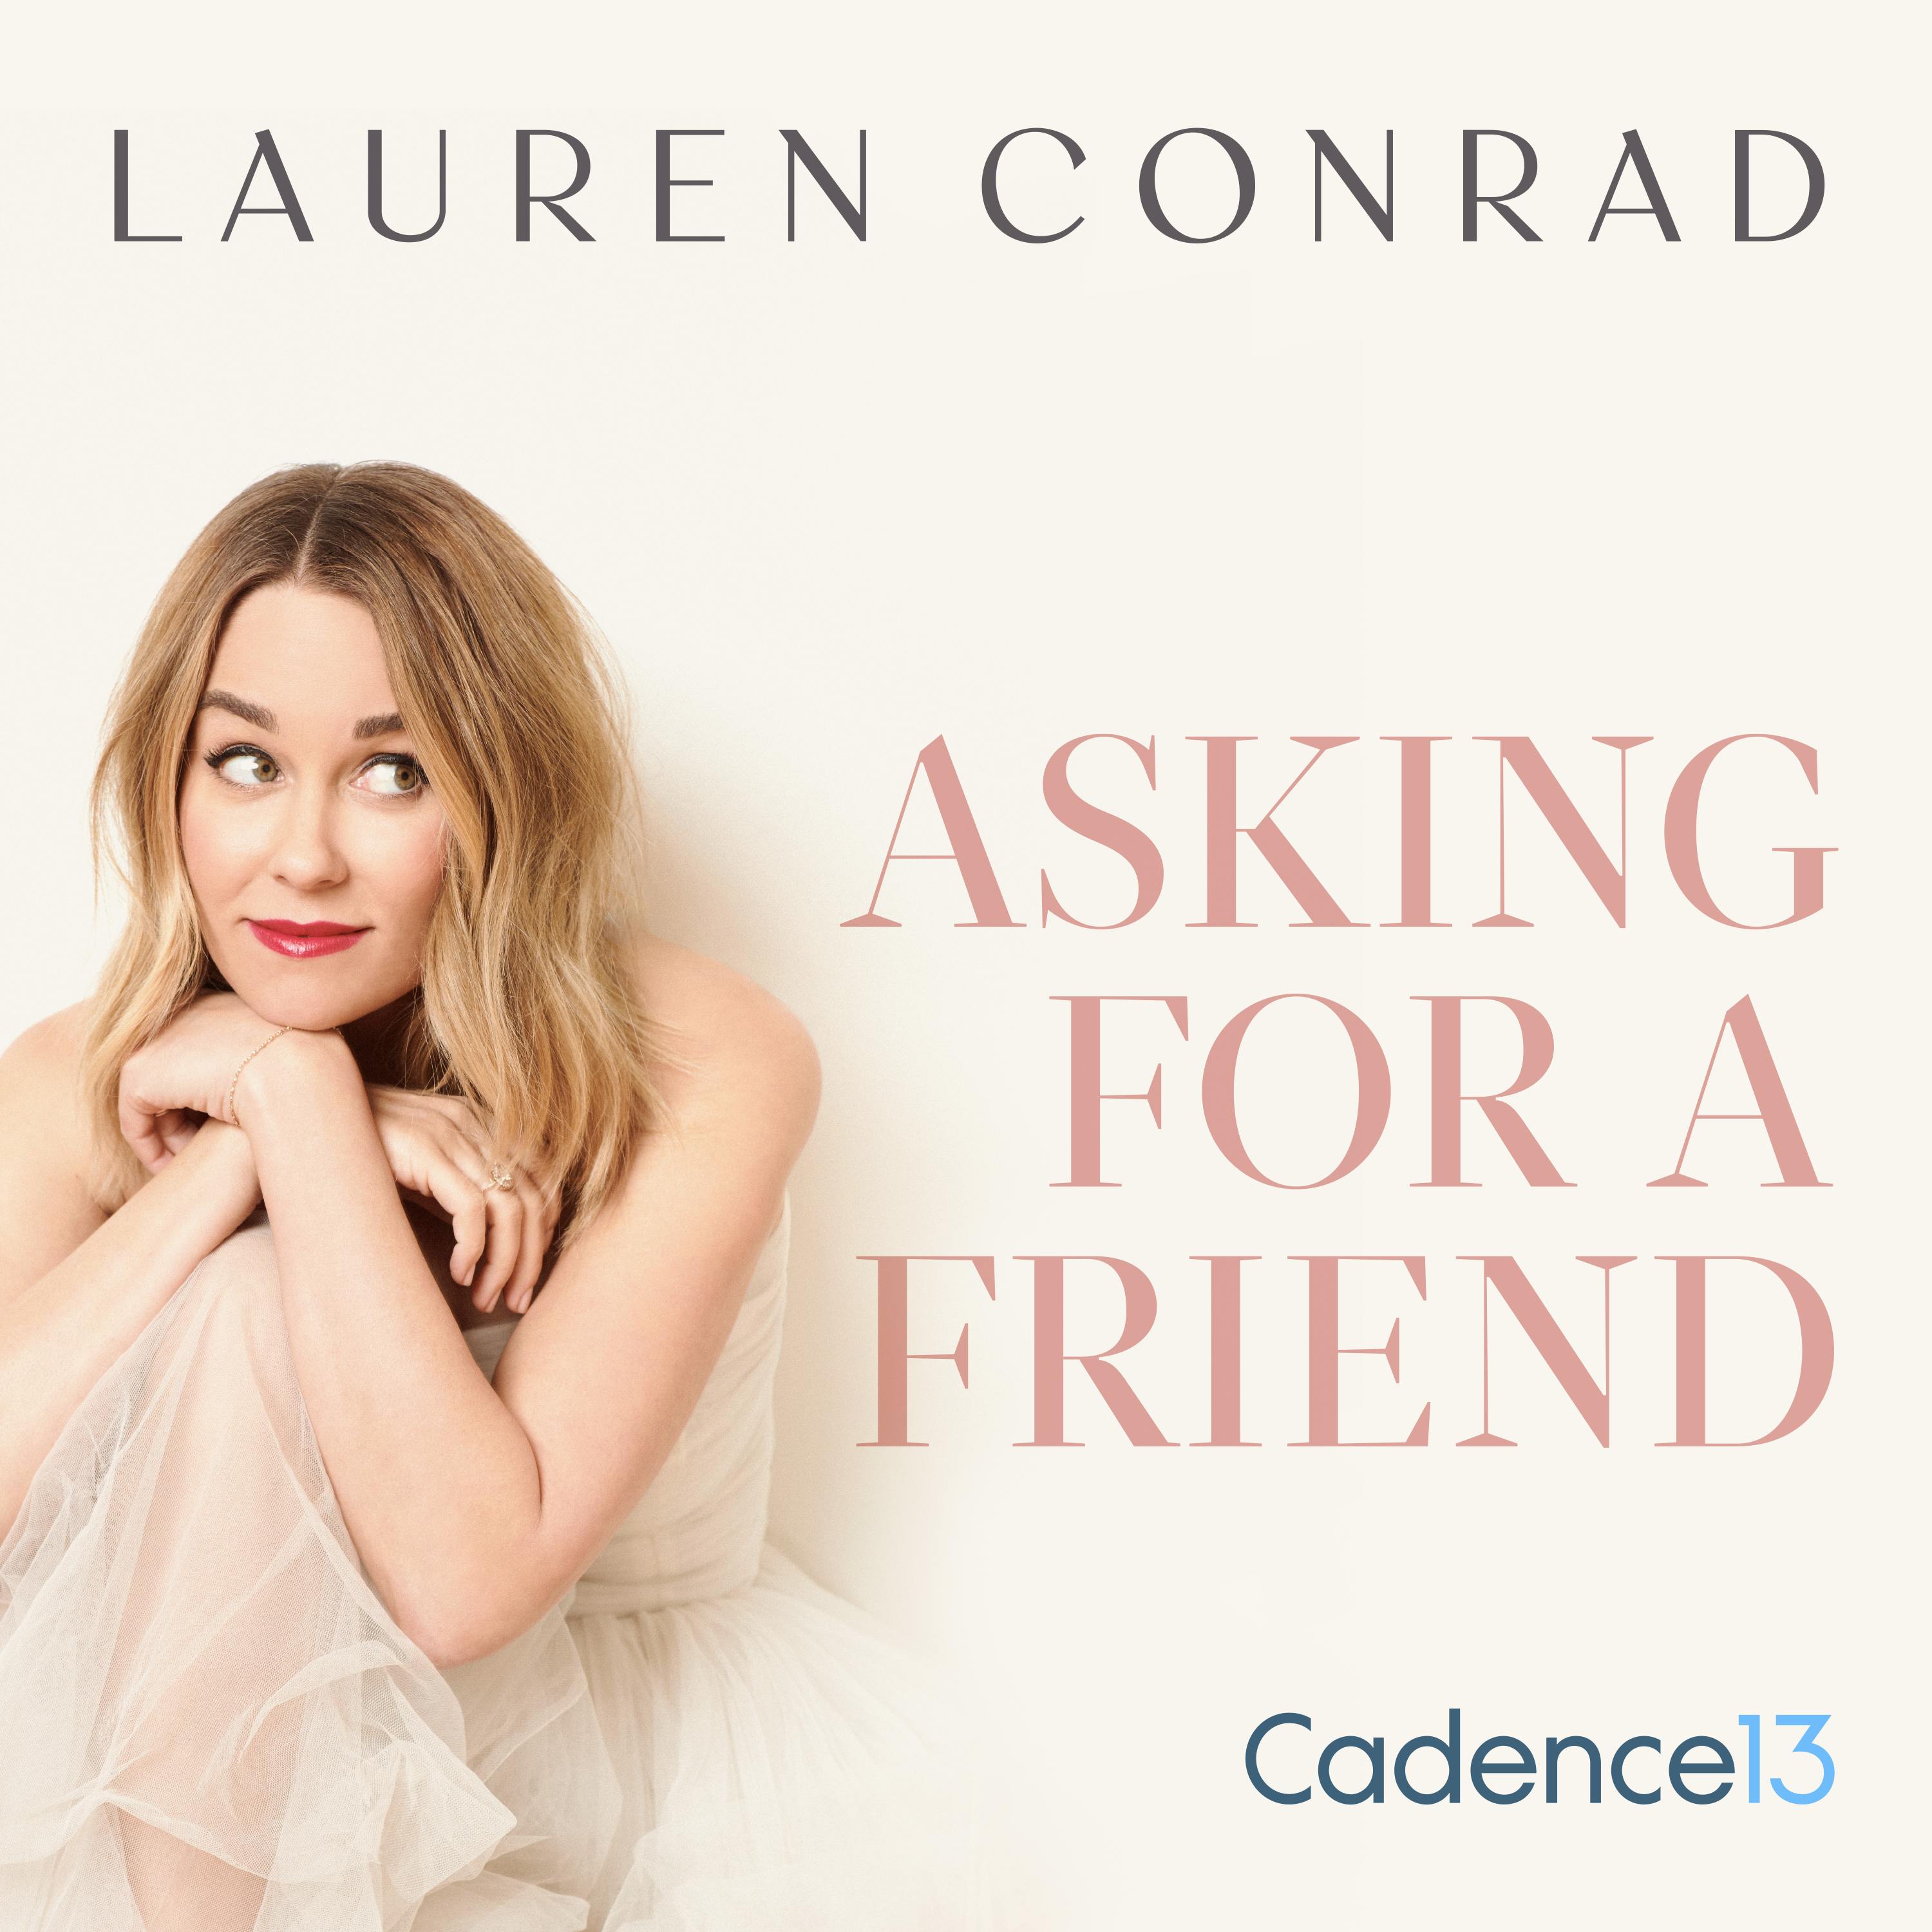 Lauren Conrad: Asking for a Friend podcast show image